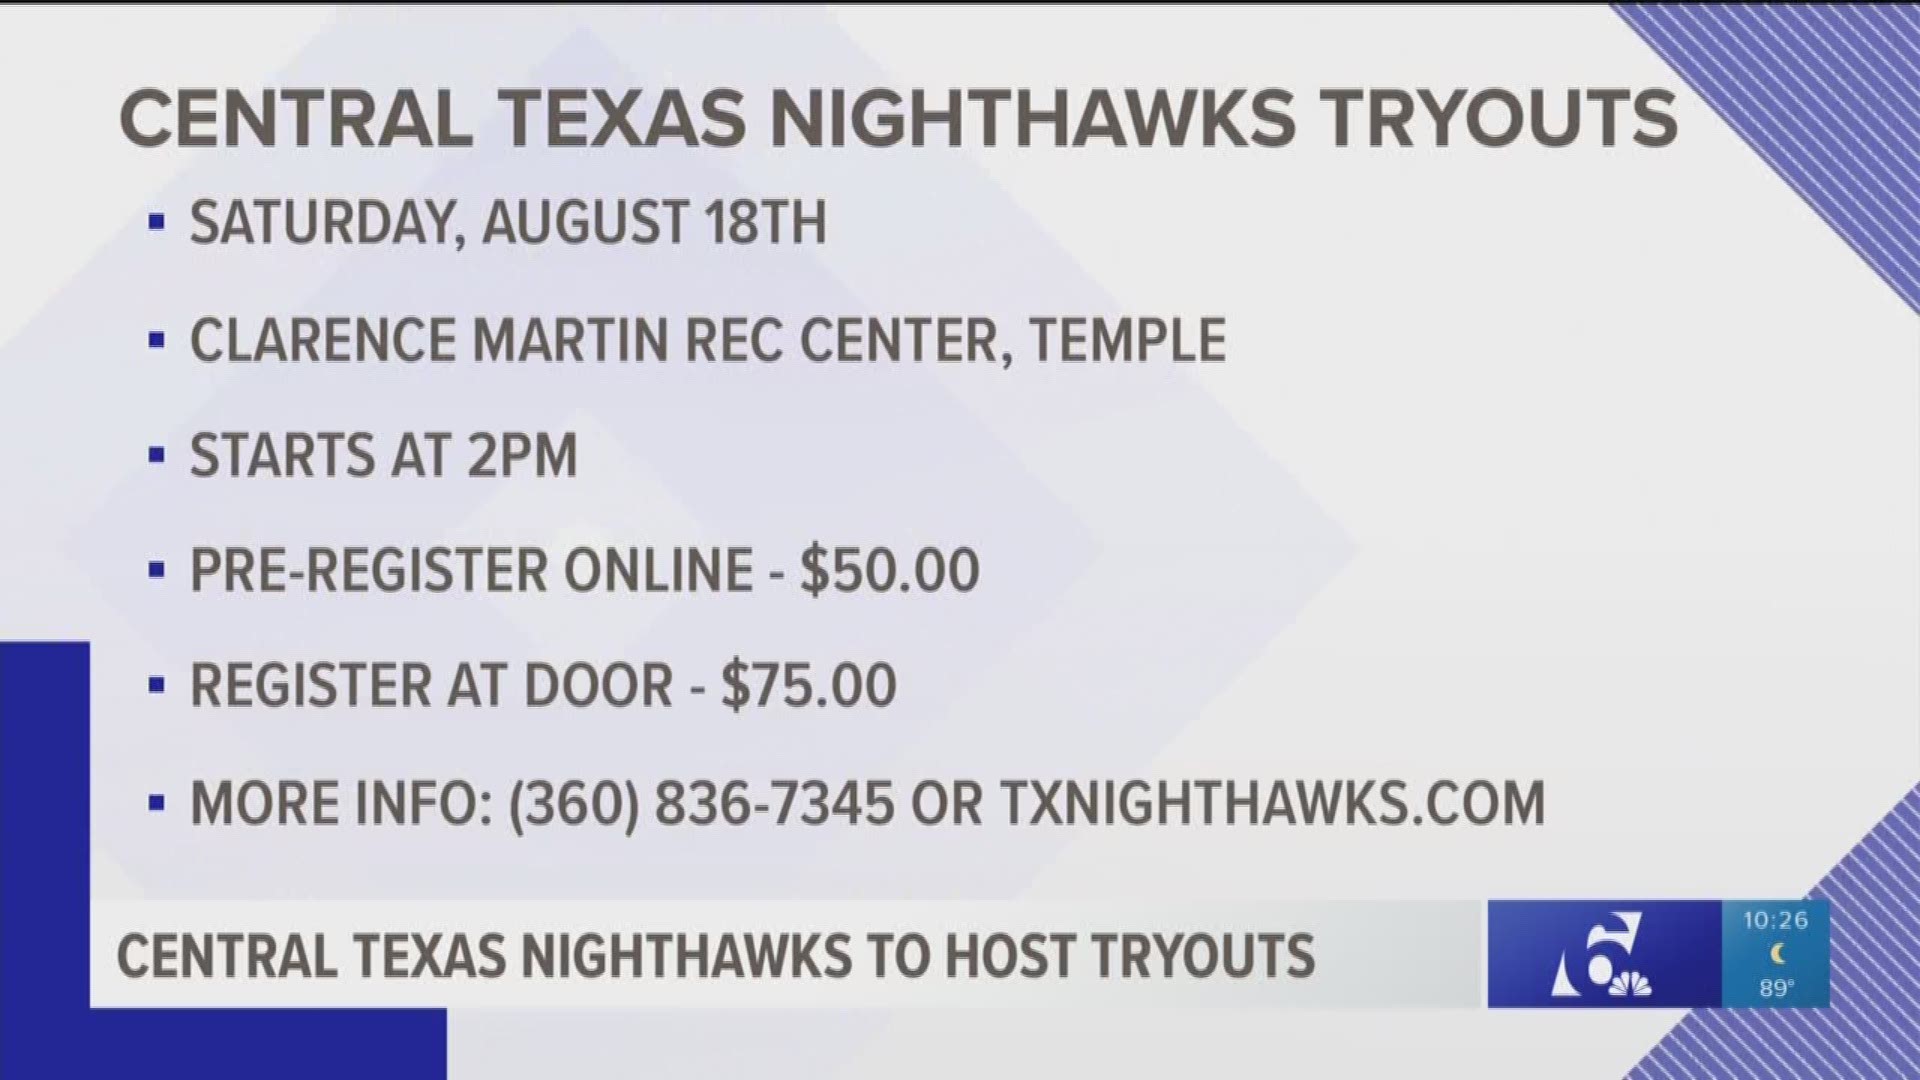 Central Texas Nighthawks to host tryouts on Saturday